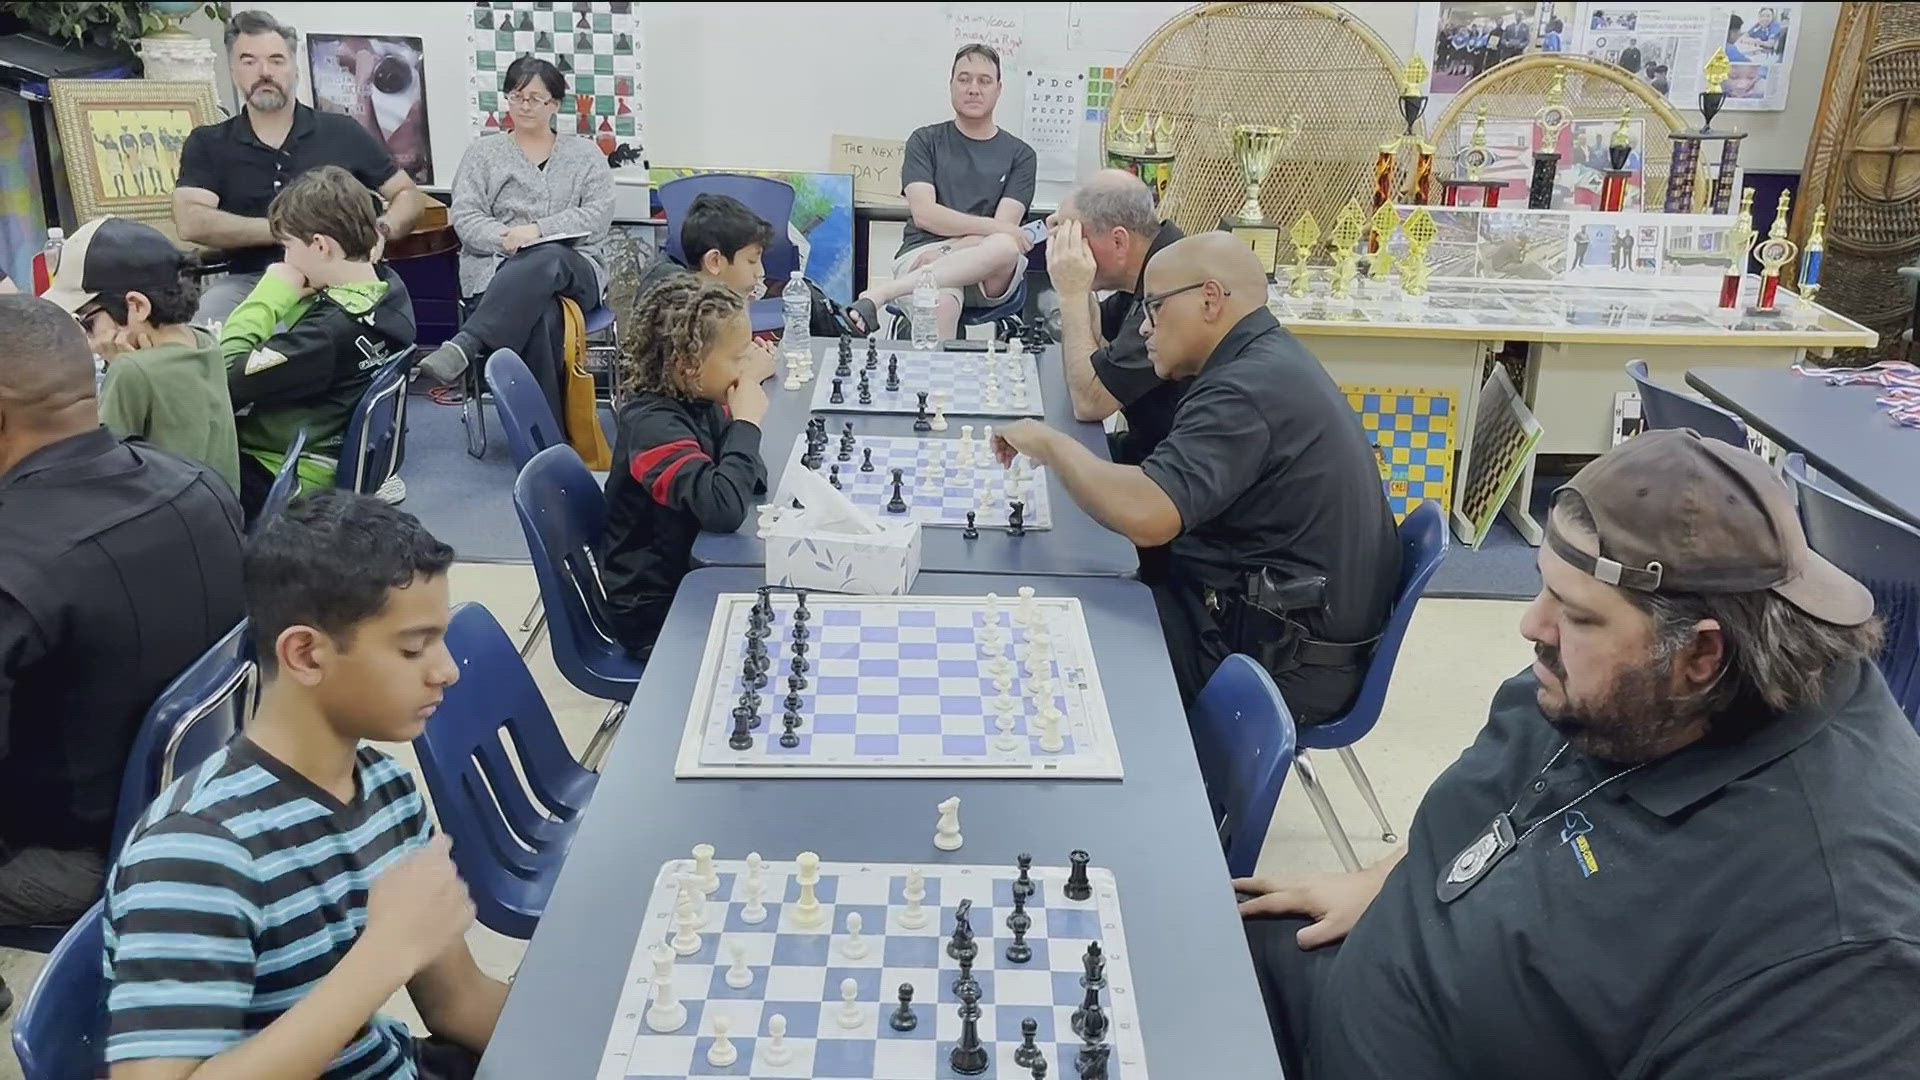 The tournaments have been an opportunity for young children to learn more about police and law enforcement.